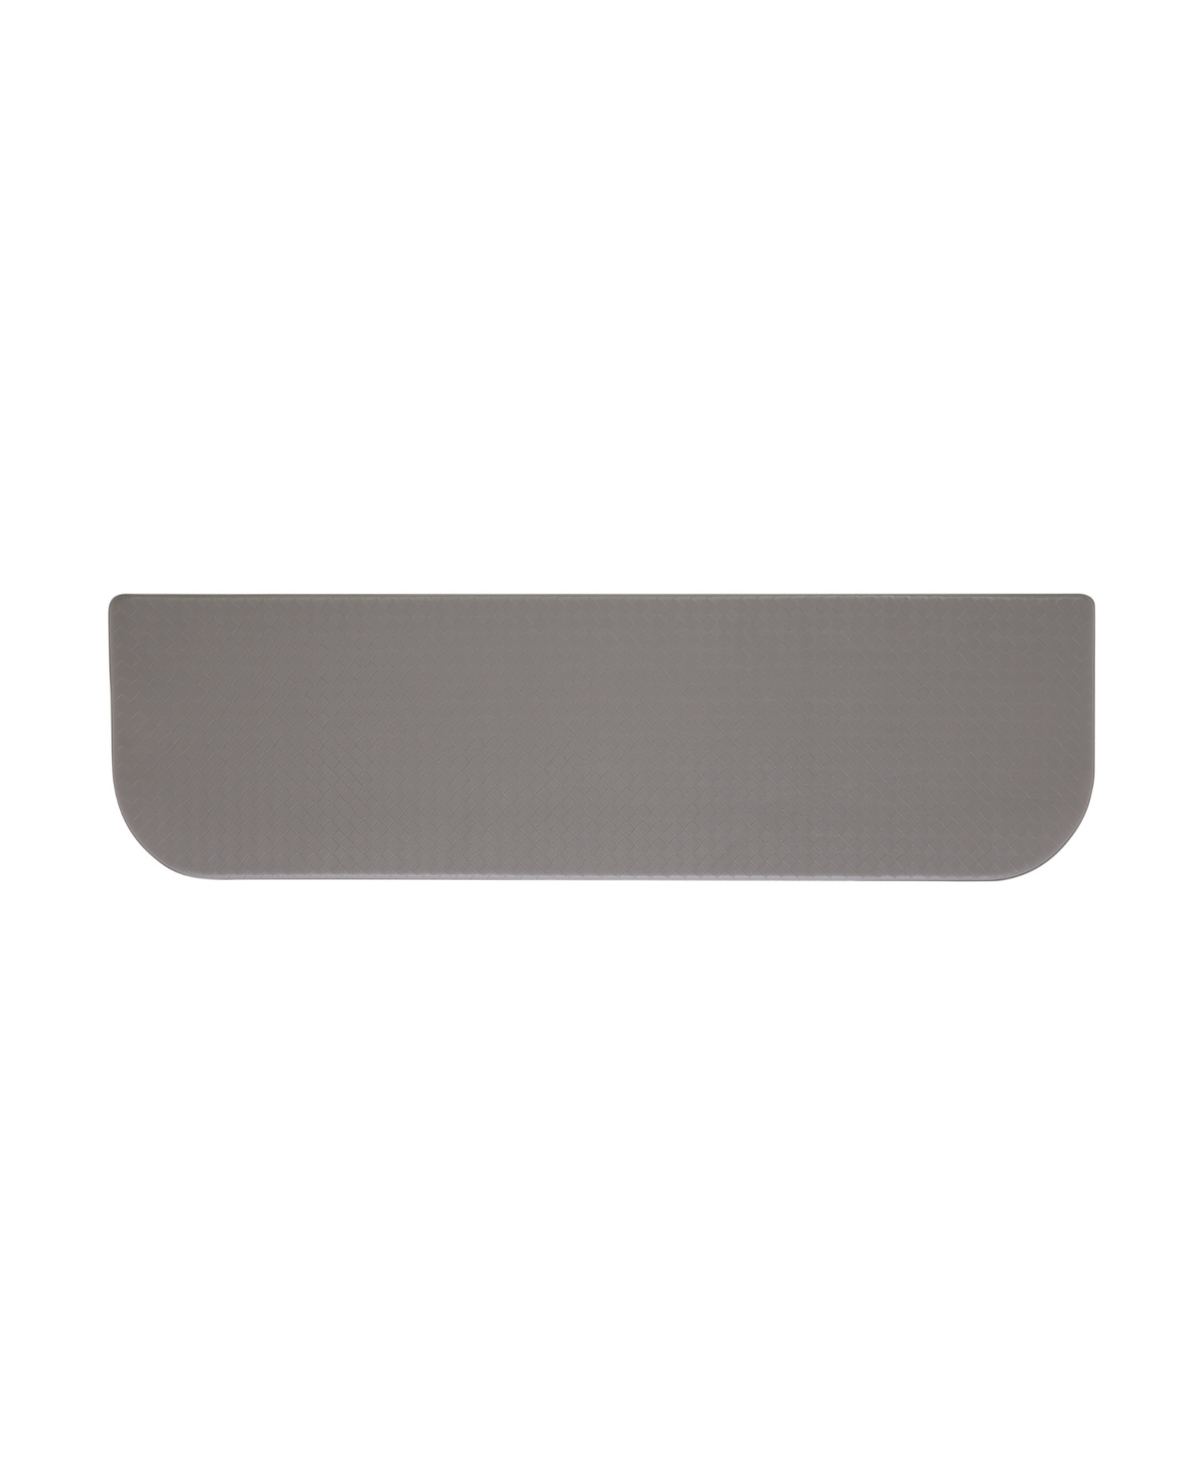 Chef Gear Playa Wedge Fatigue-resistant Kitchen Mat, 17.5" X 60" In Gray